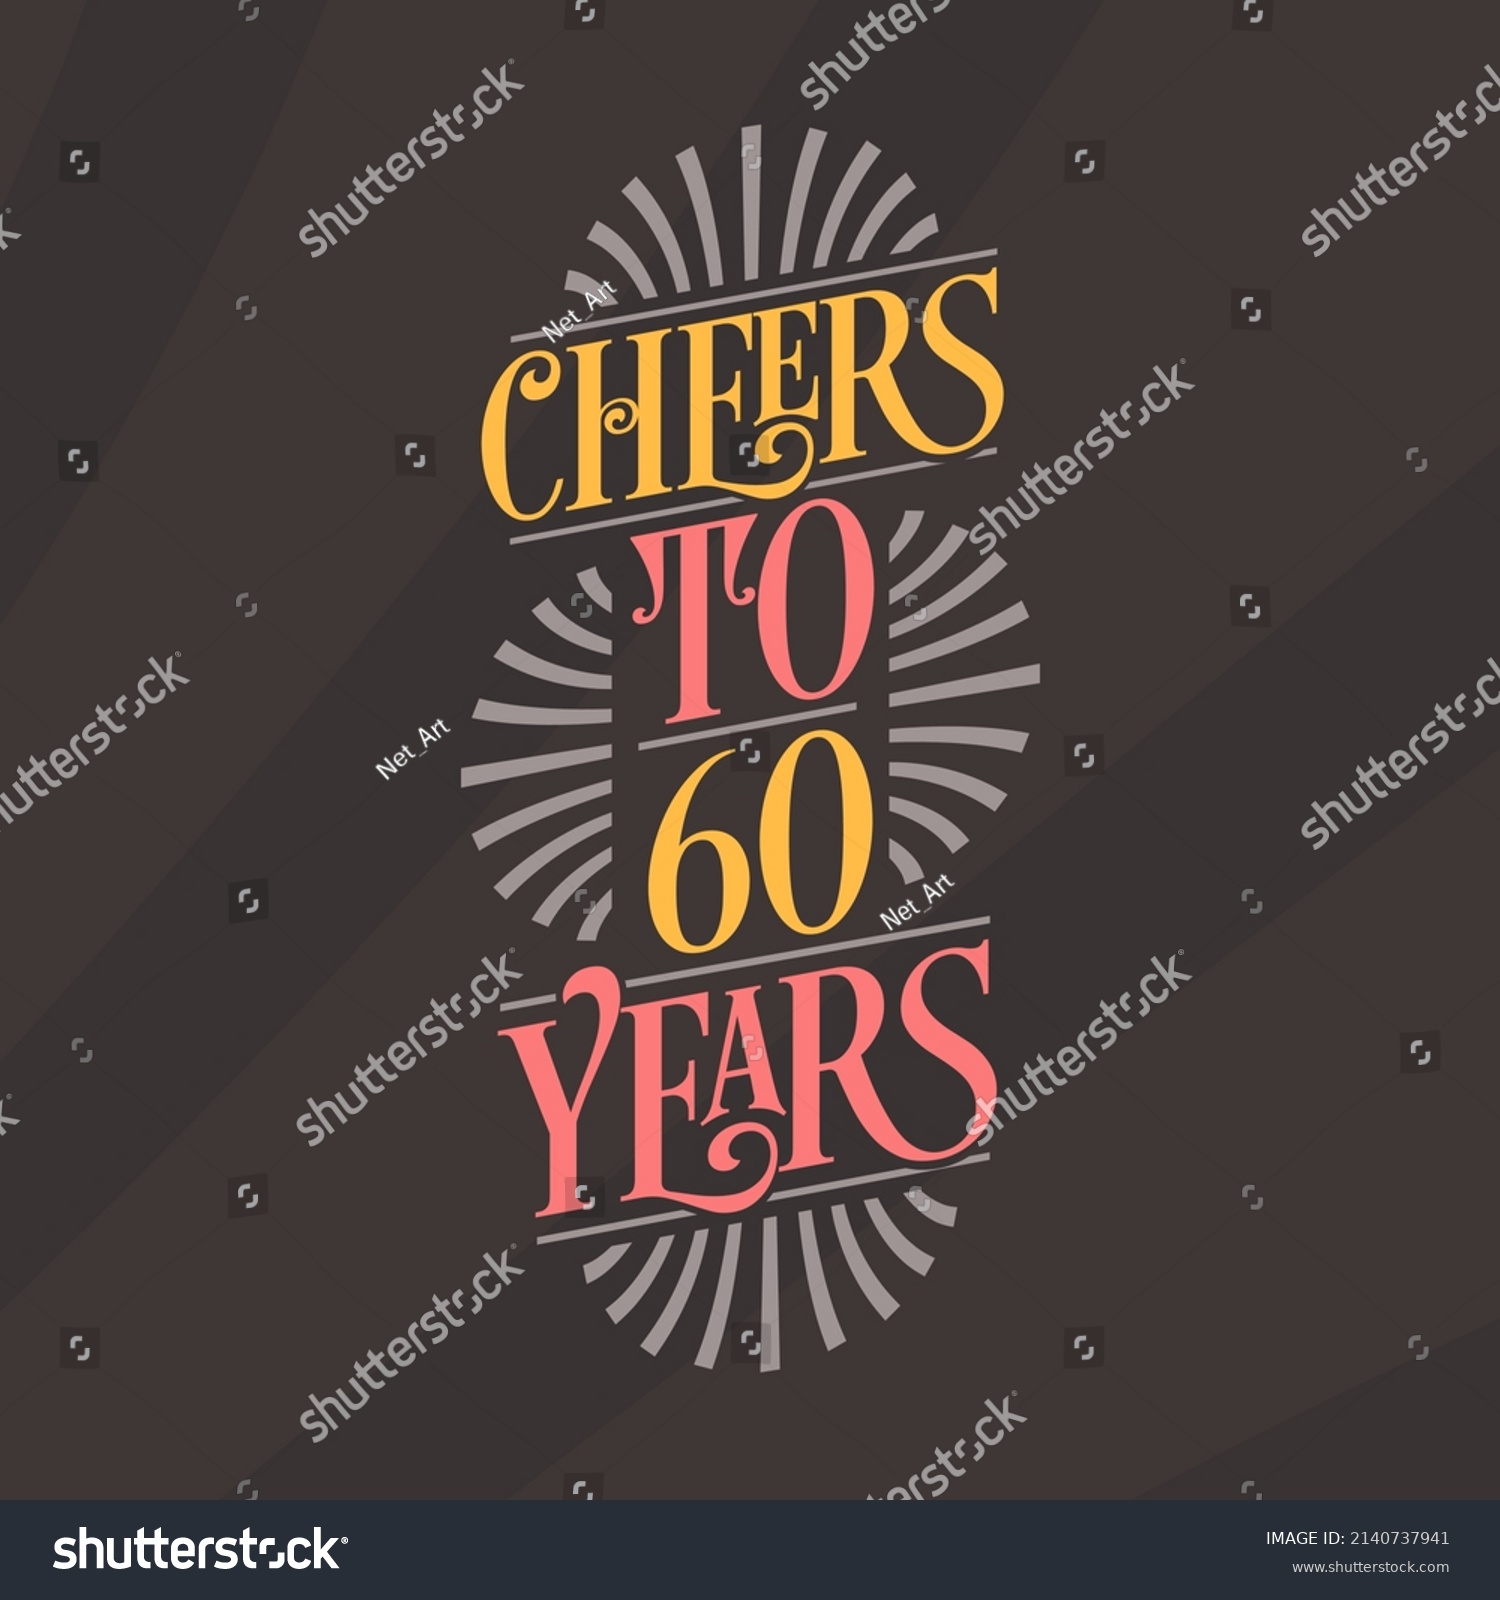 SVG of Cheers to 60 years, 60th birthday celebration svg